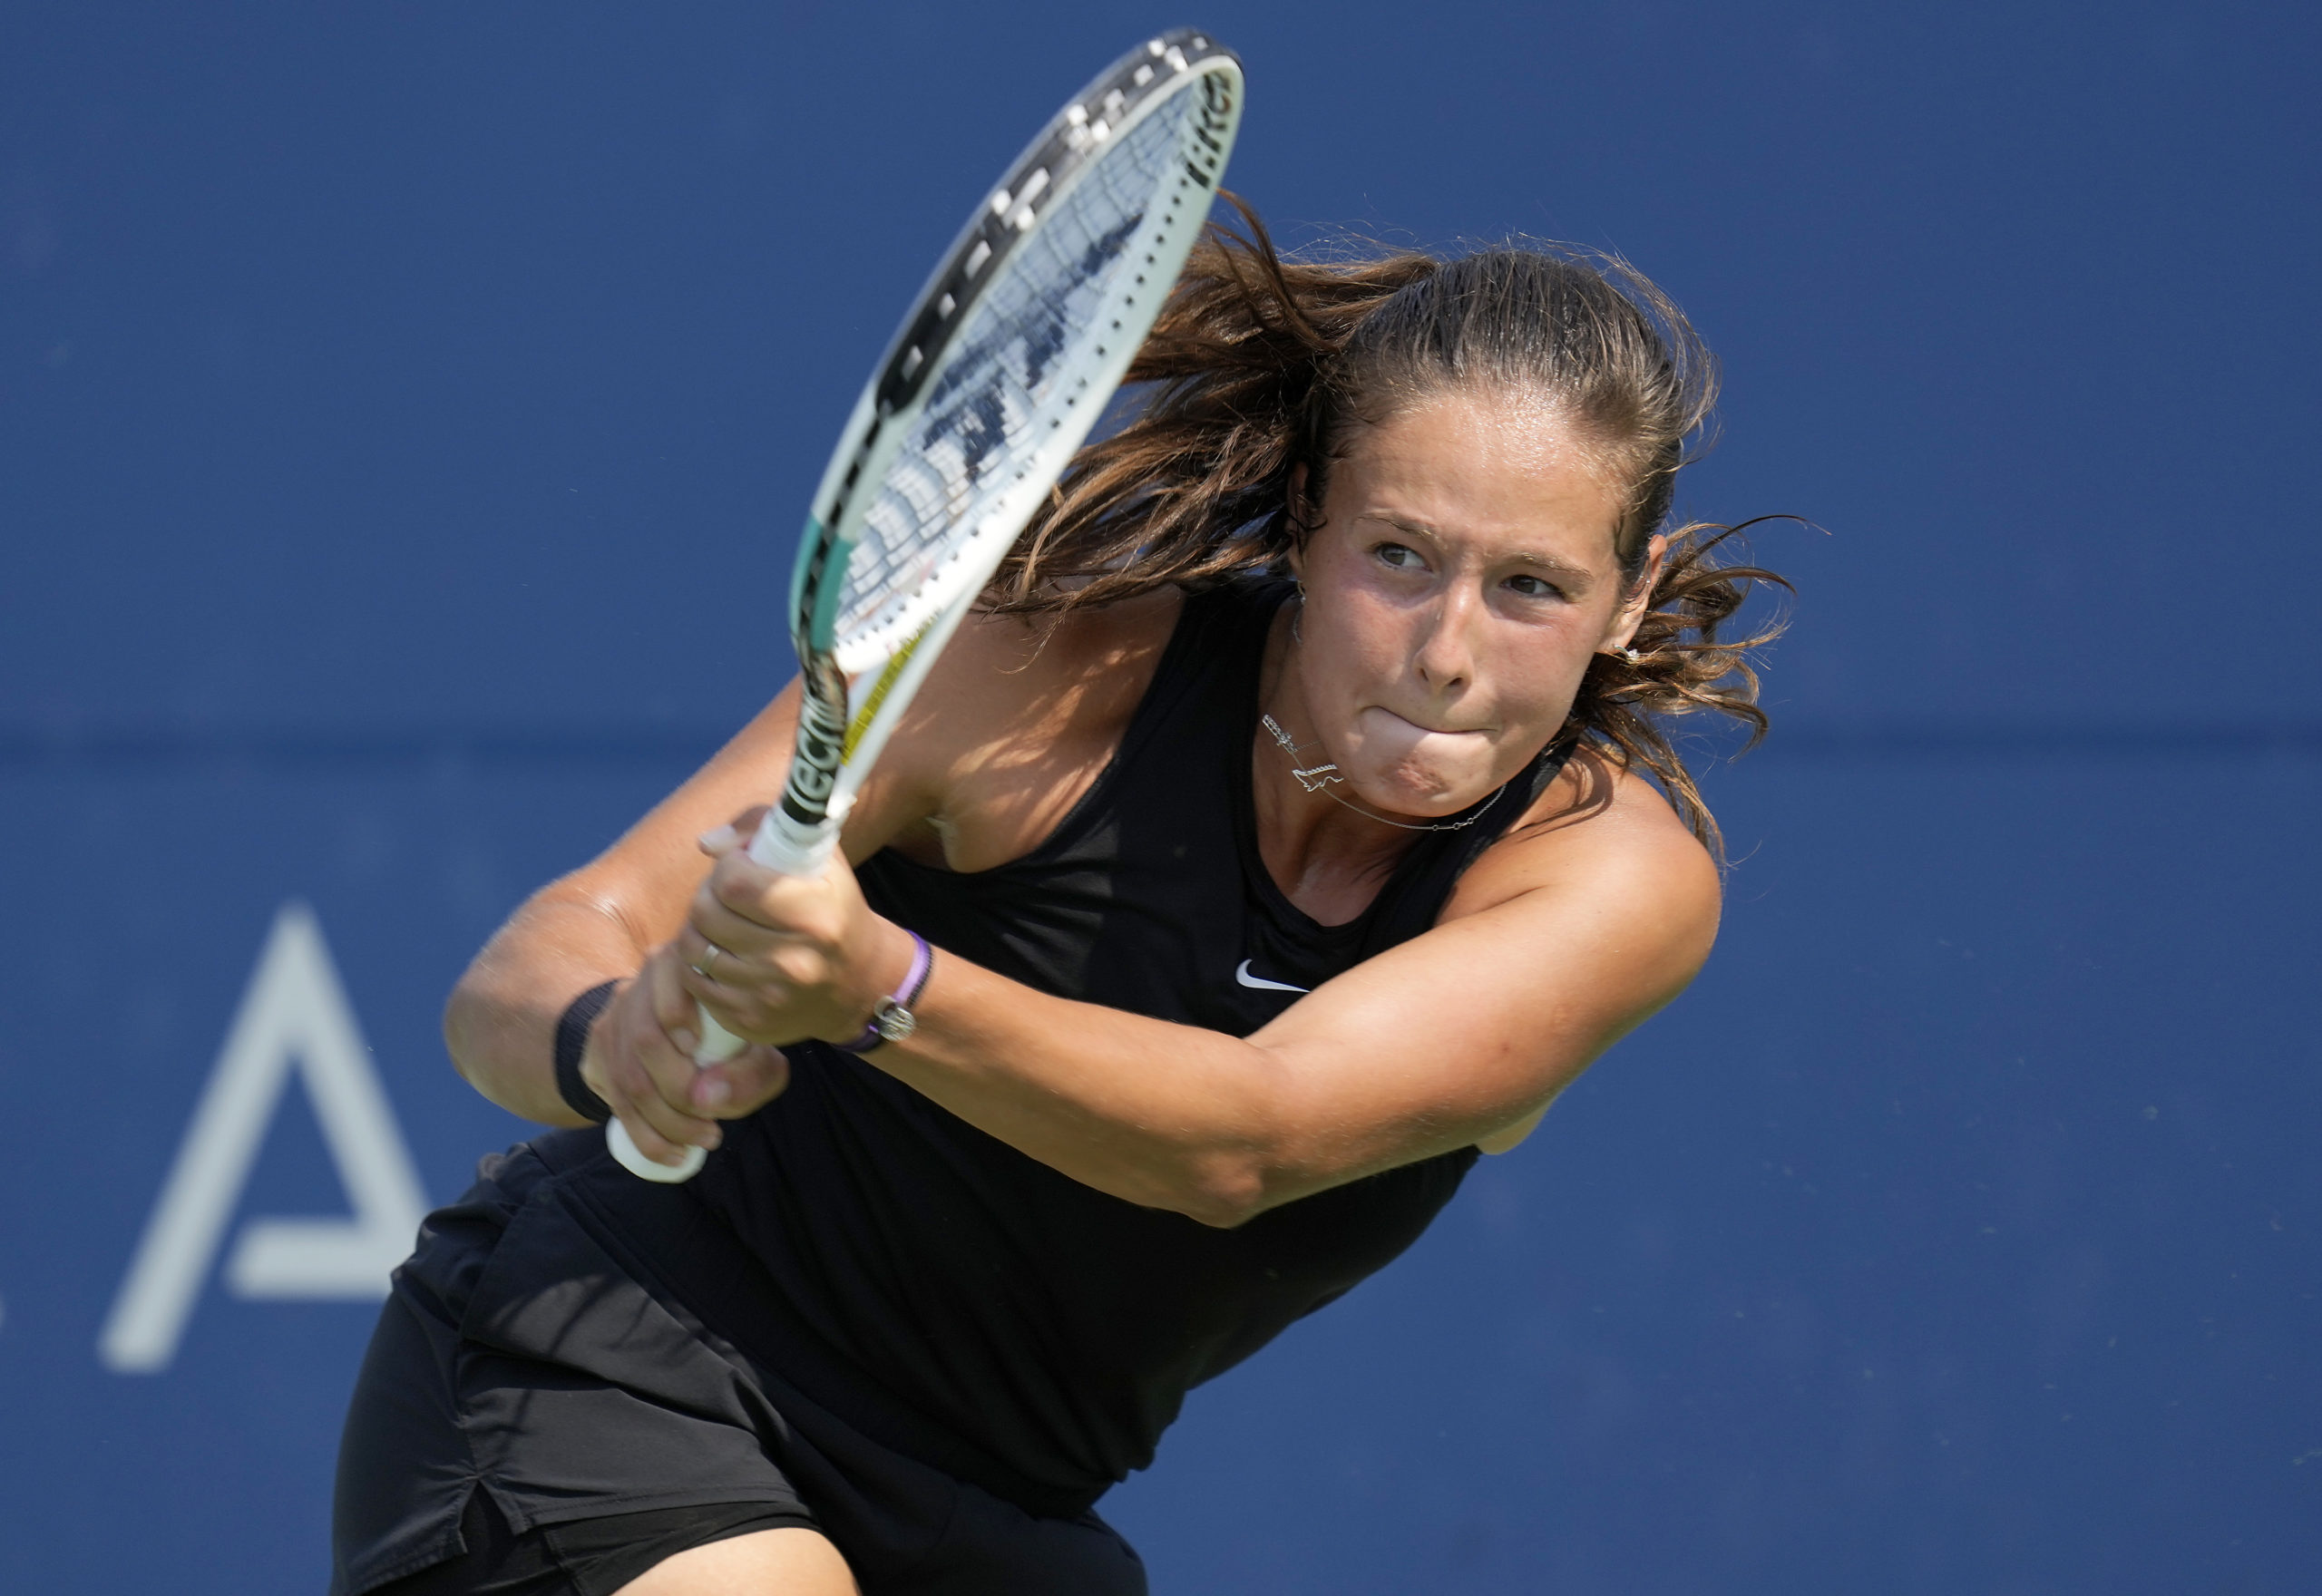 SAN JOSE, CALIFORNIA - AUGUST 07: Daria Kasatkina of Russia returns a shot to Elise Mertens of Belgium during their semifinals match on day 6 of the Mubadala Silicon Valley Classic at Spartan Tennis Complex on August 07, 2021 in San Jose, California. (Photo by Thearon W. Henderson/Getty Images)